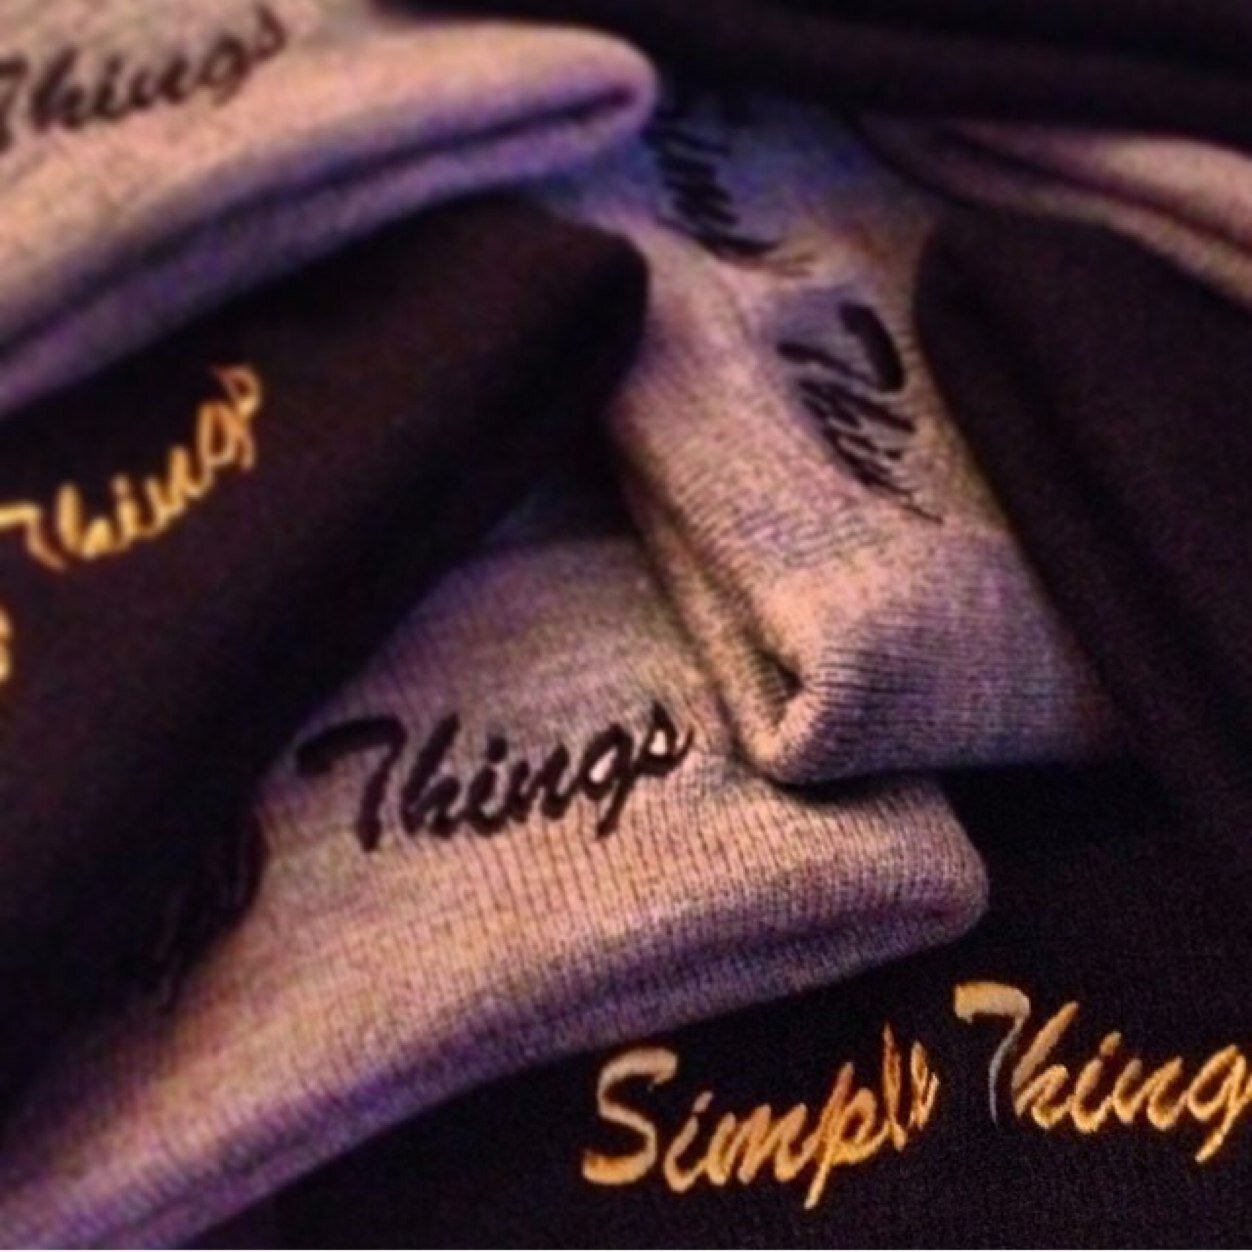 Jouney the movement #SimpleThings